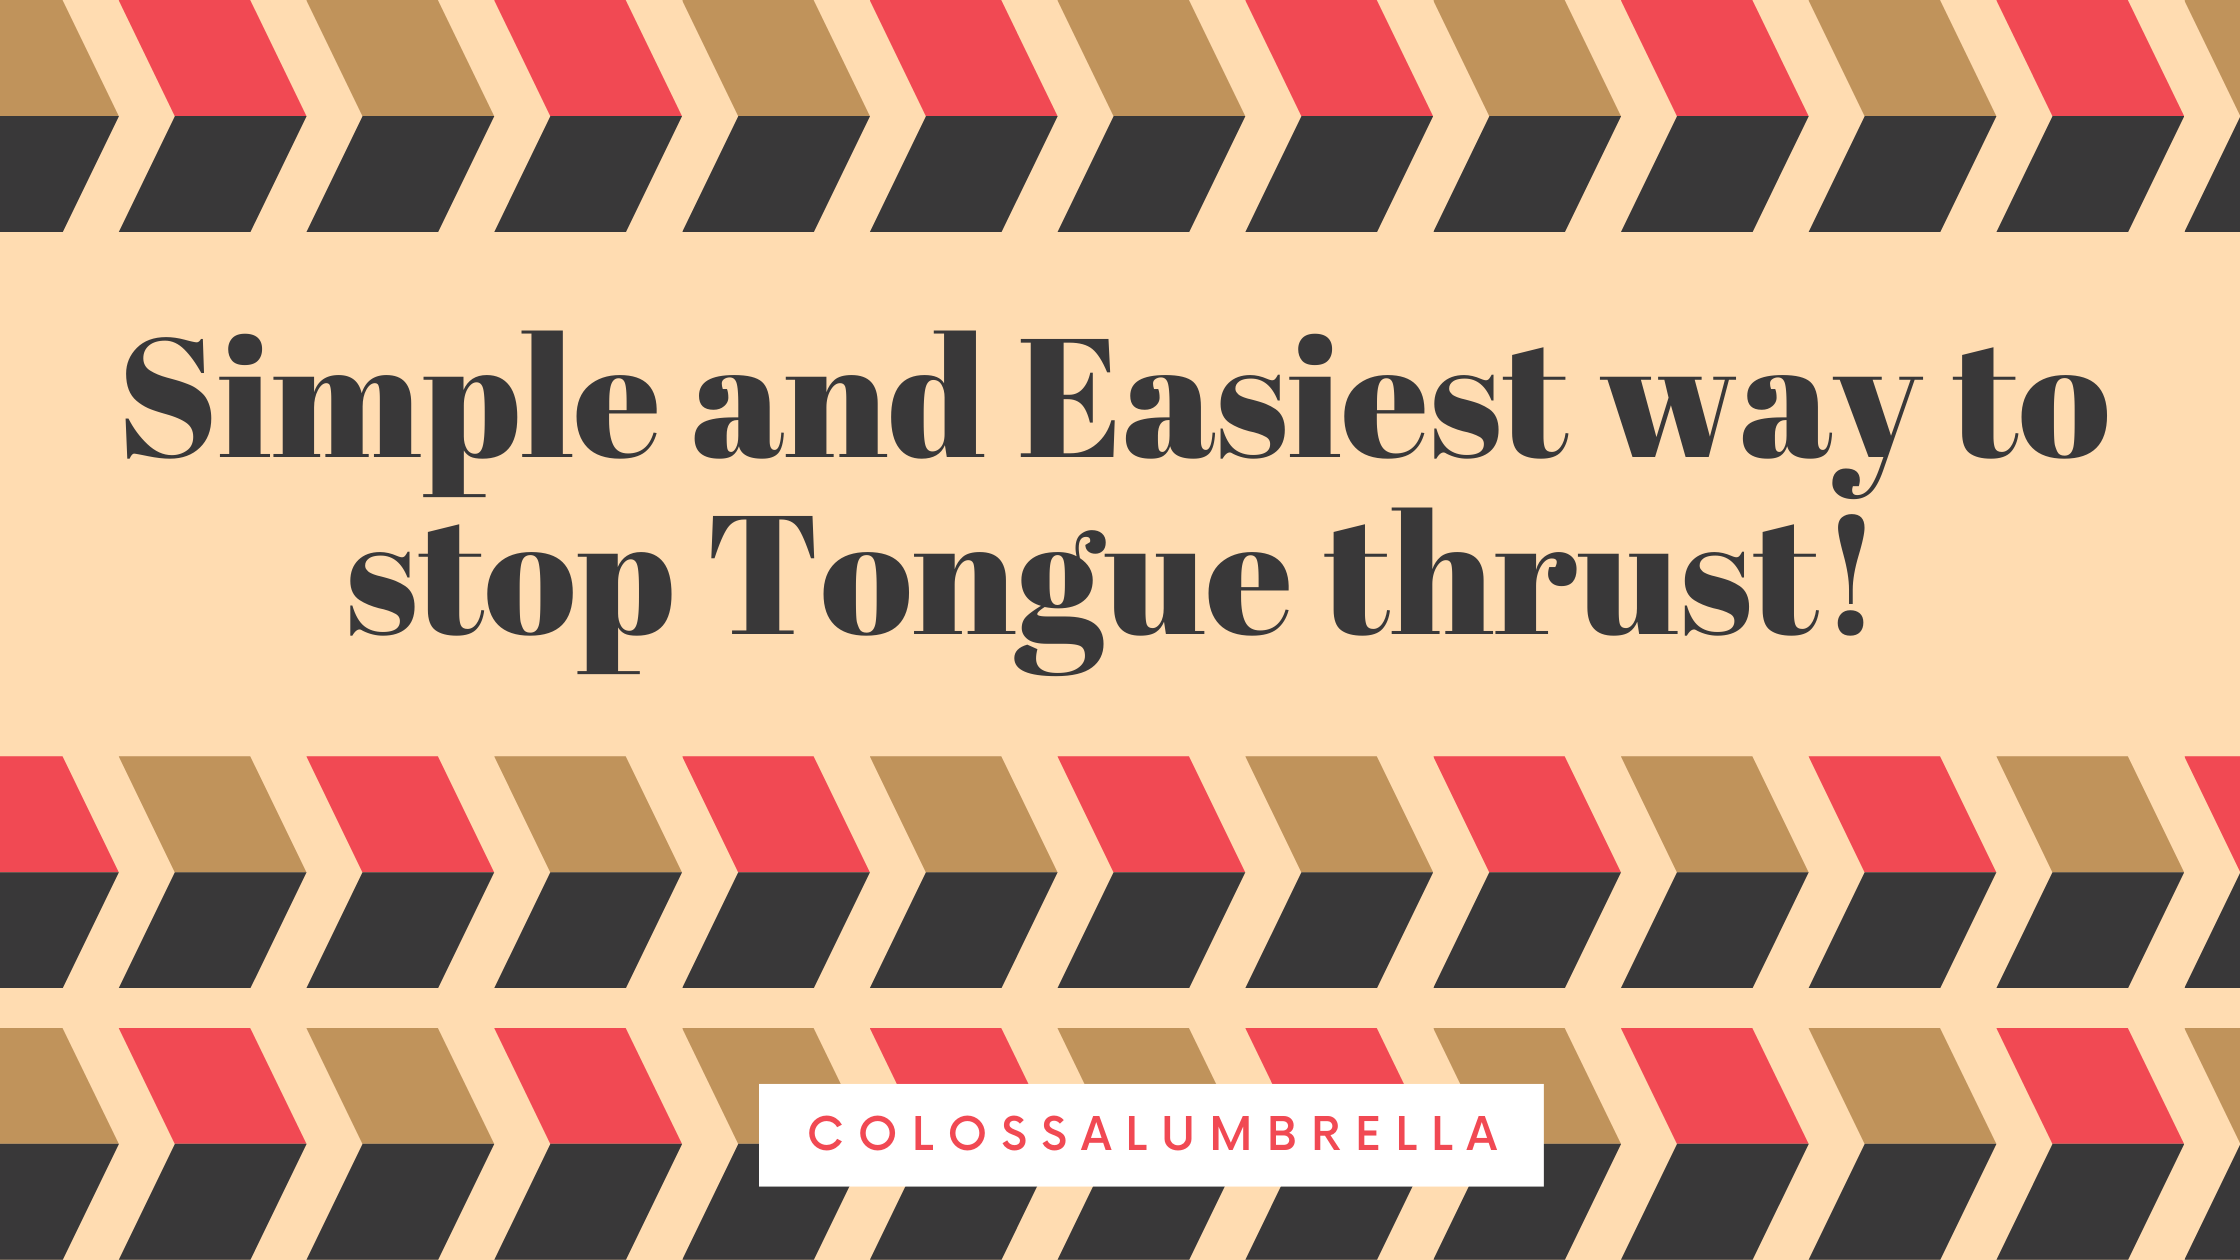 How To Stop Tongue Thrusting: The Simplest, Easiest Solution!